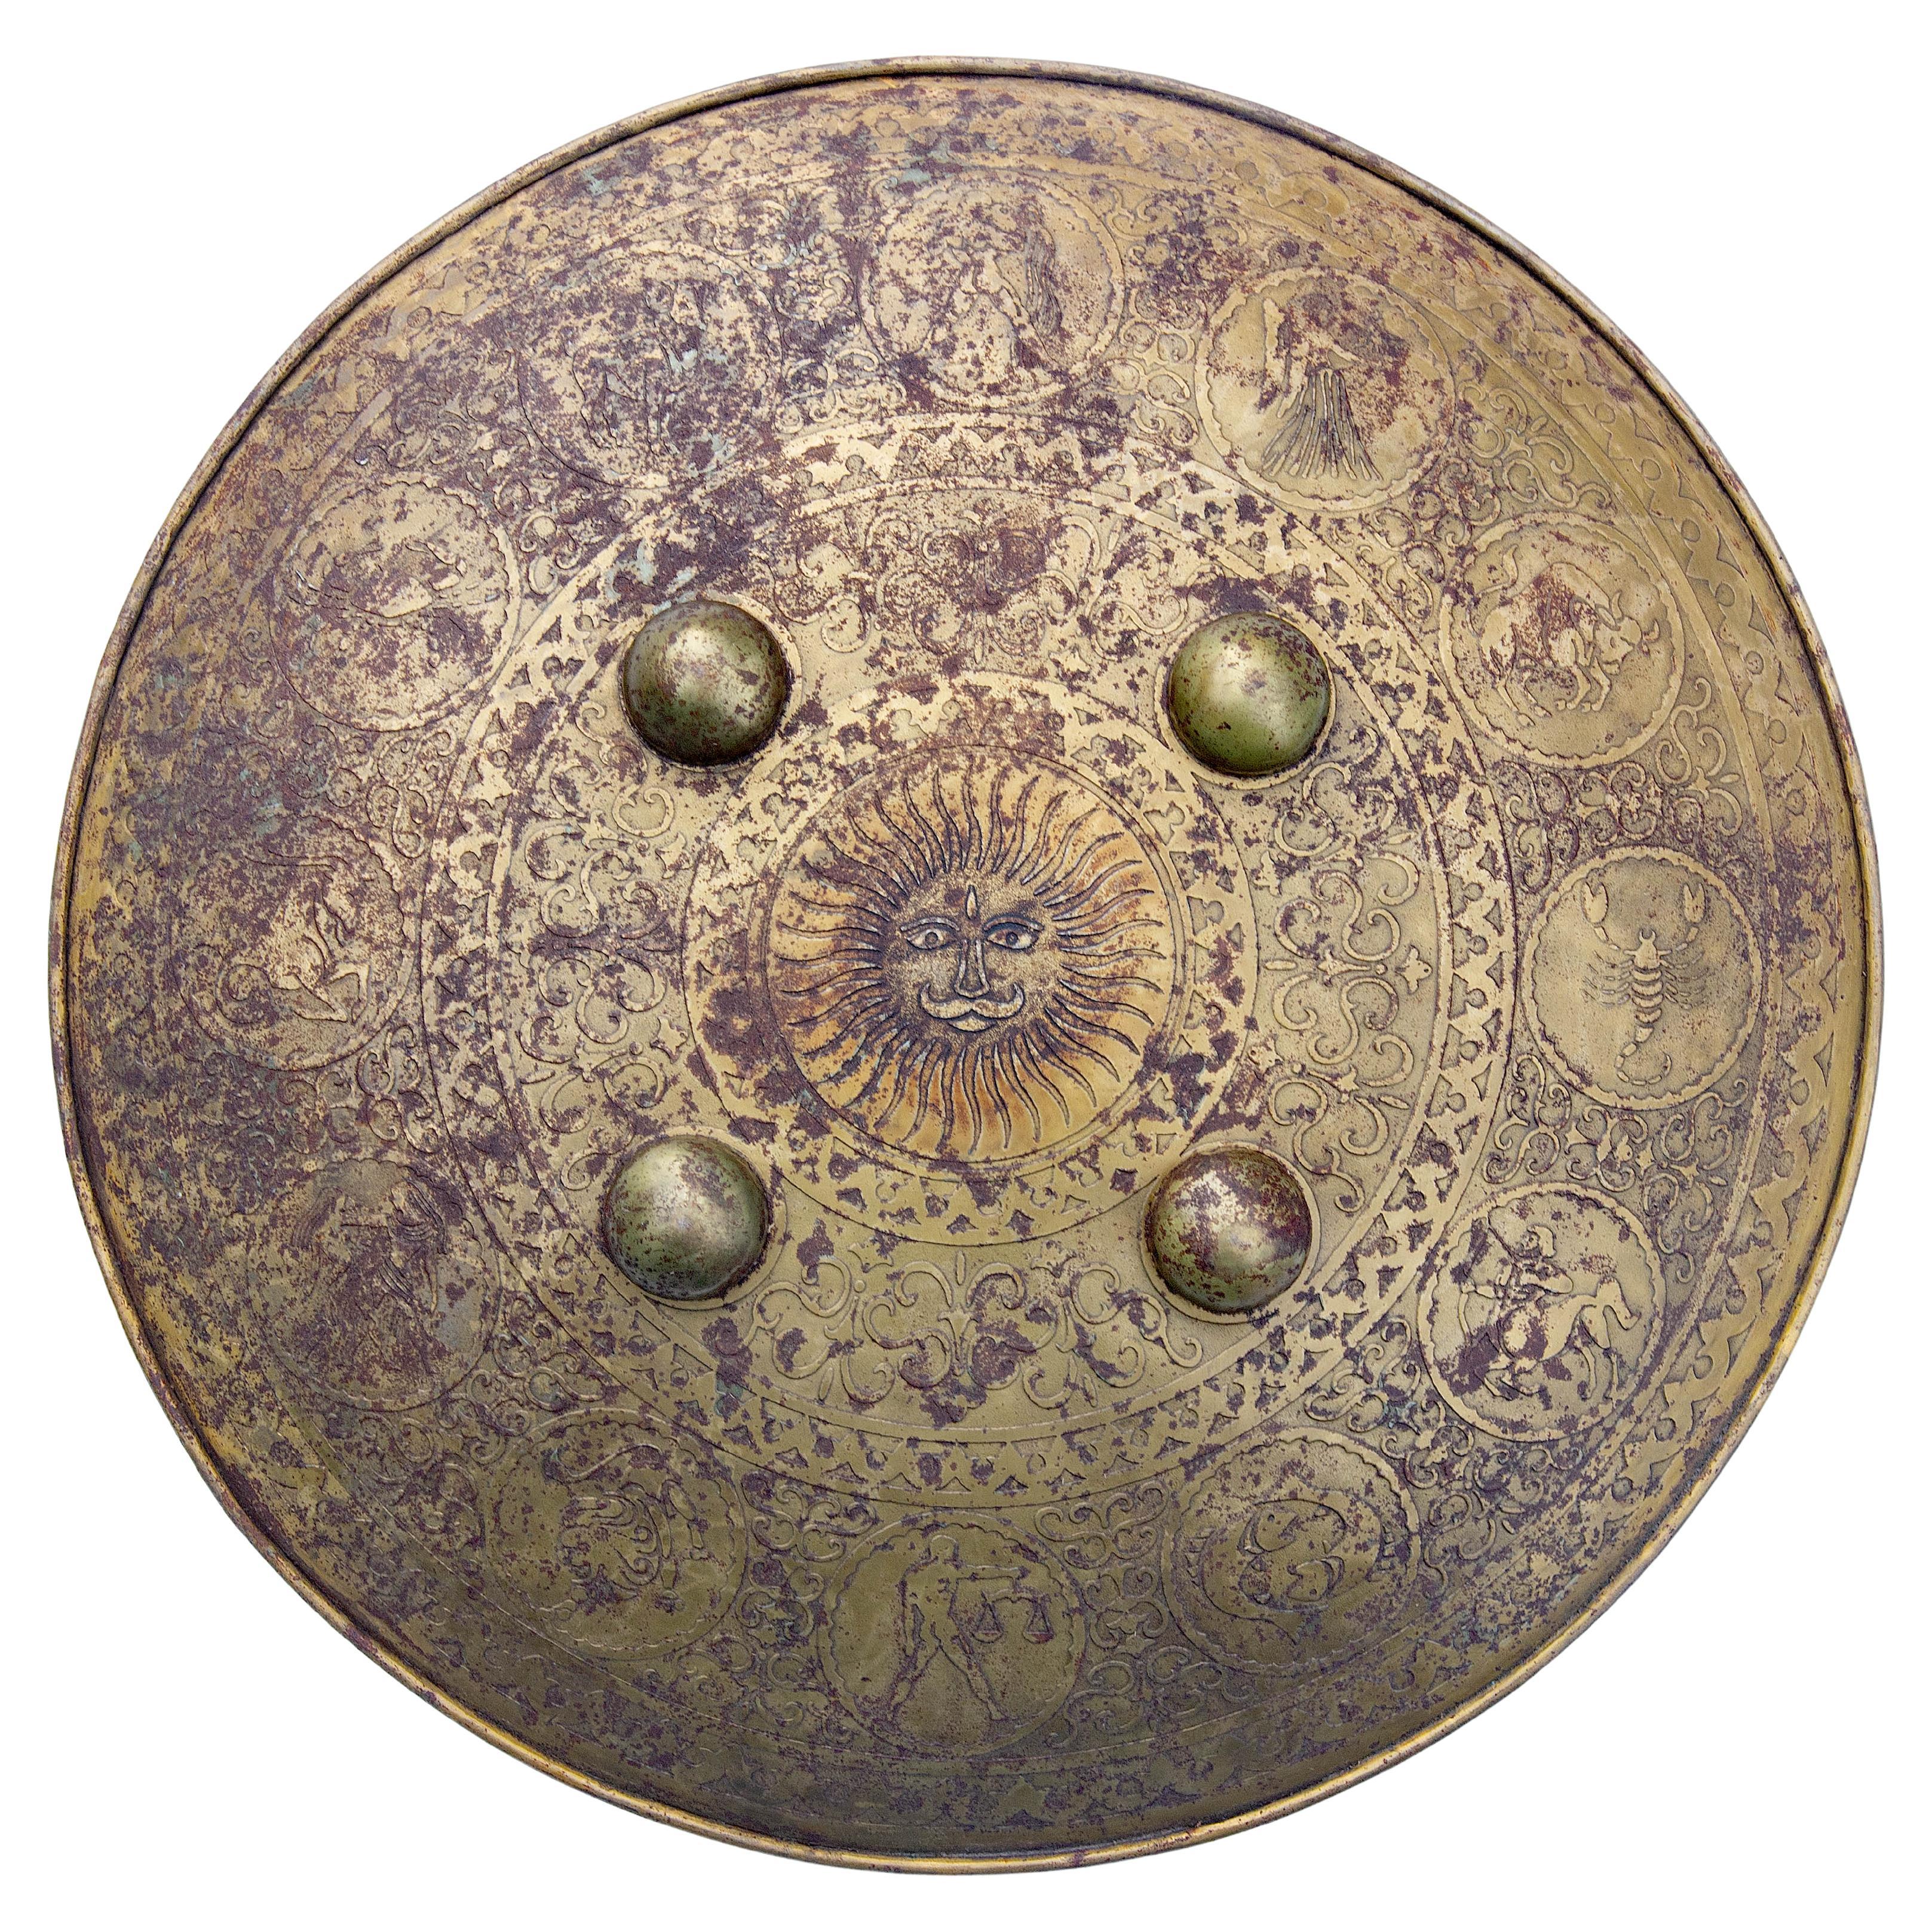 Persian Engraved Iron and Brass Shield Astrological Symbols with Starburst 